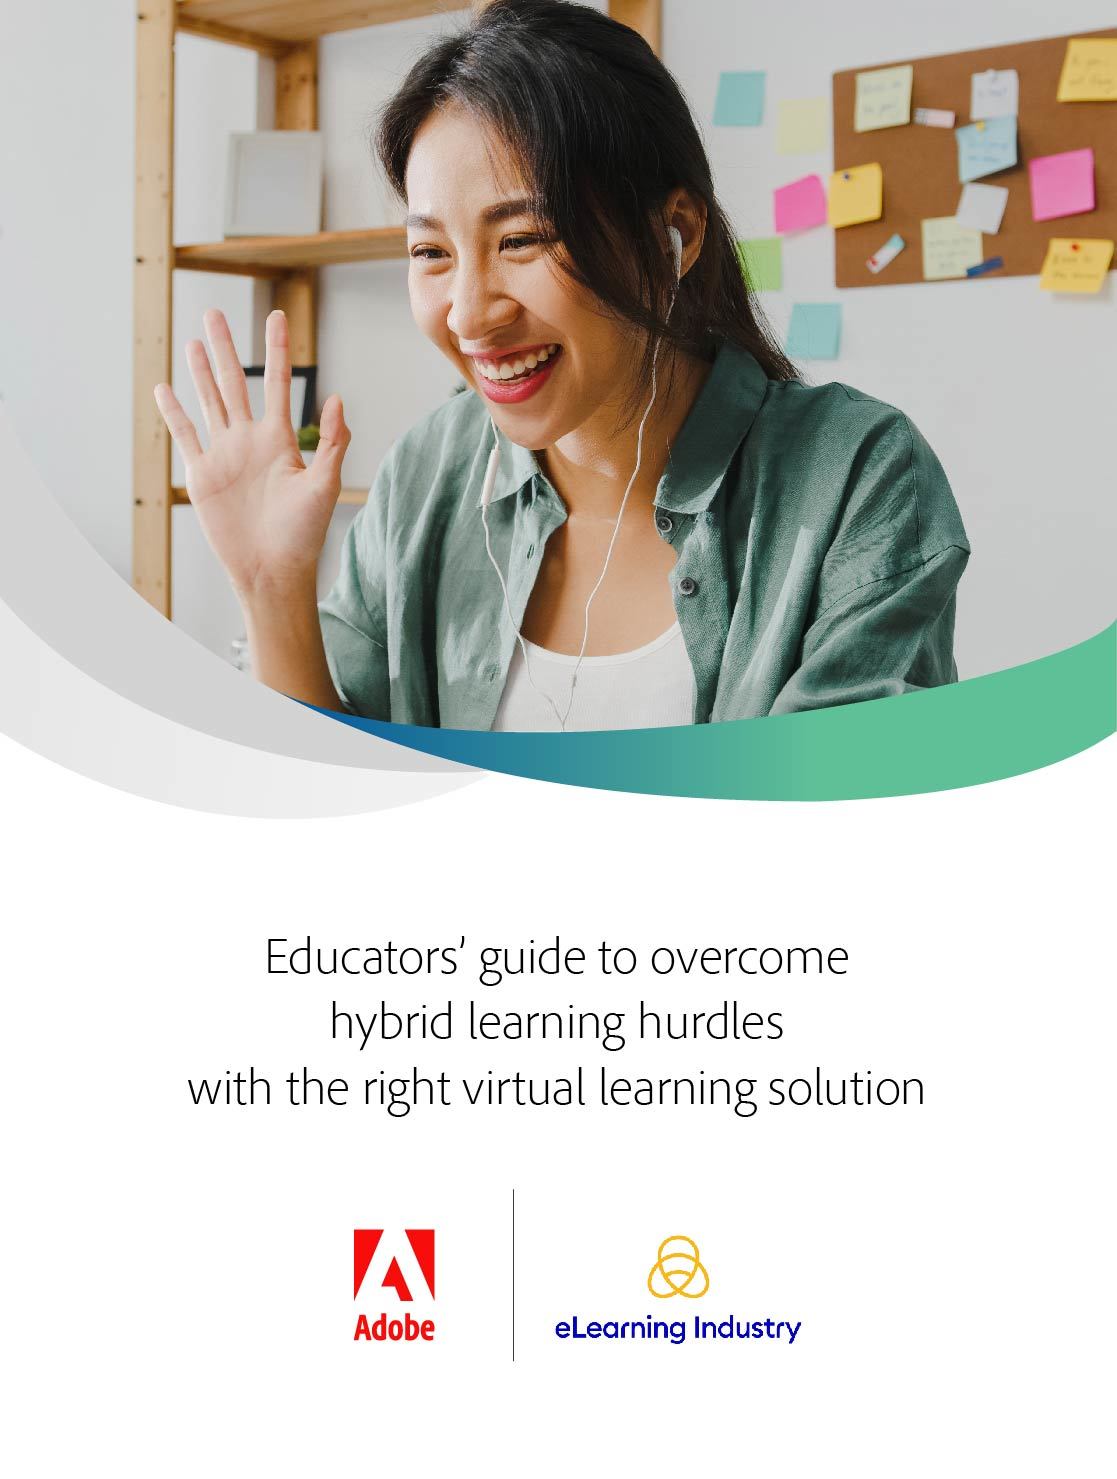 eBook Release: Educators' Guide To Overcome Hybrid Learning Hurdles With The Right Virtual Learning Solution